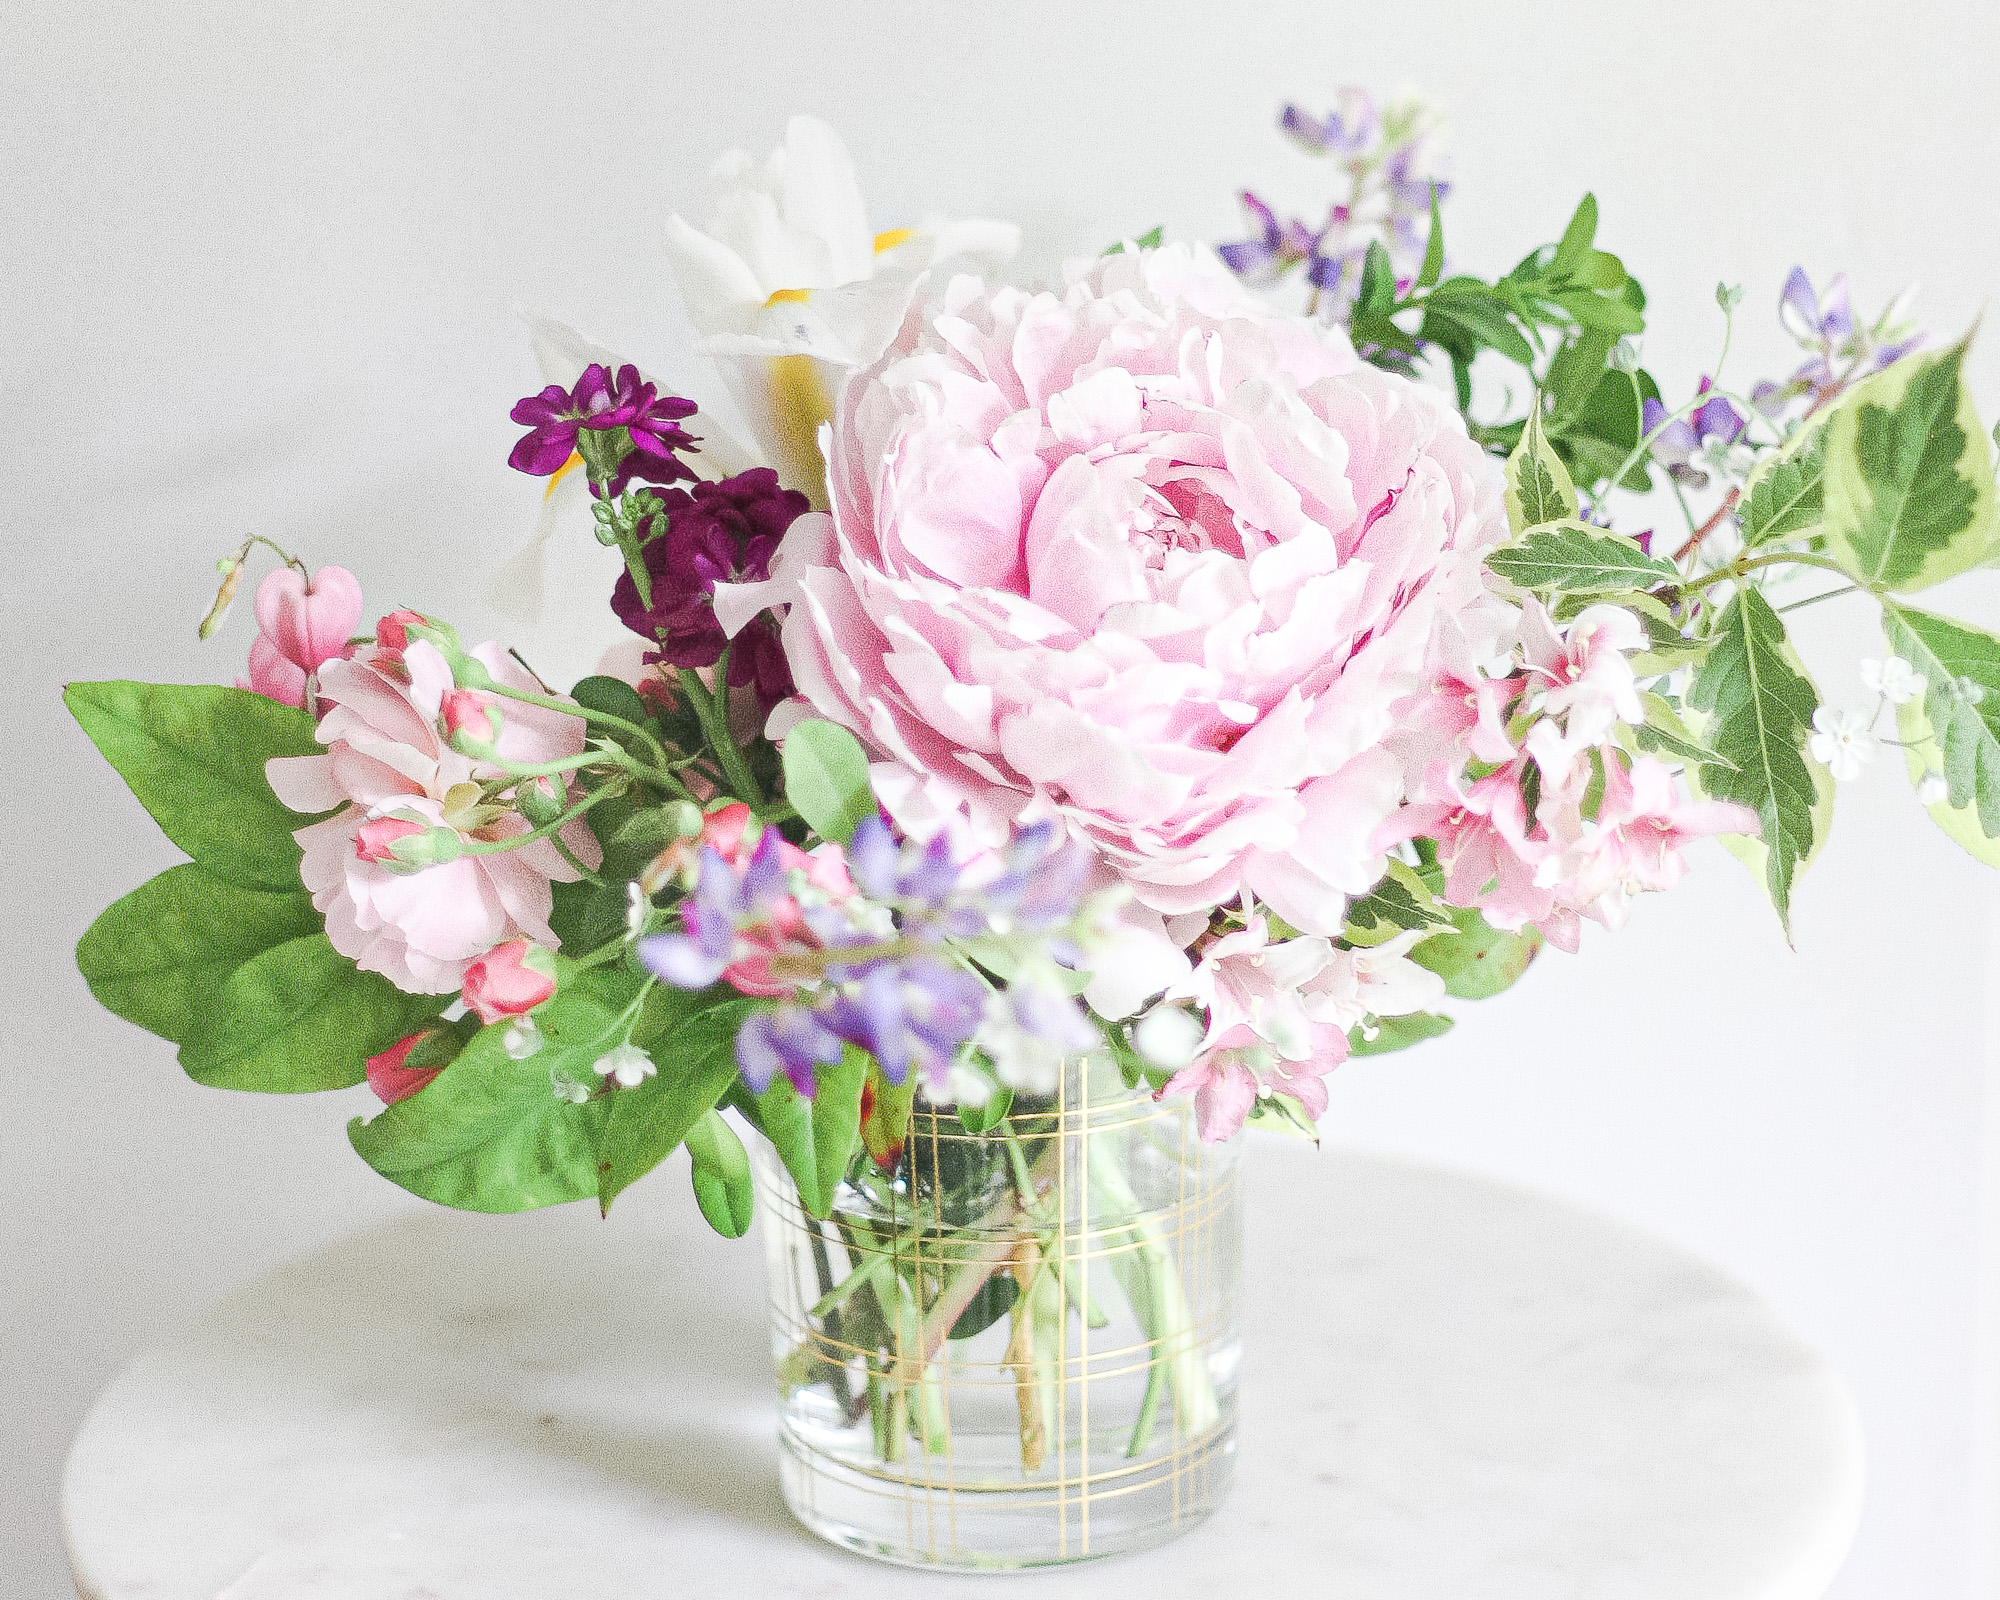 How to Create Your Own Floral Arrangements